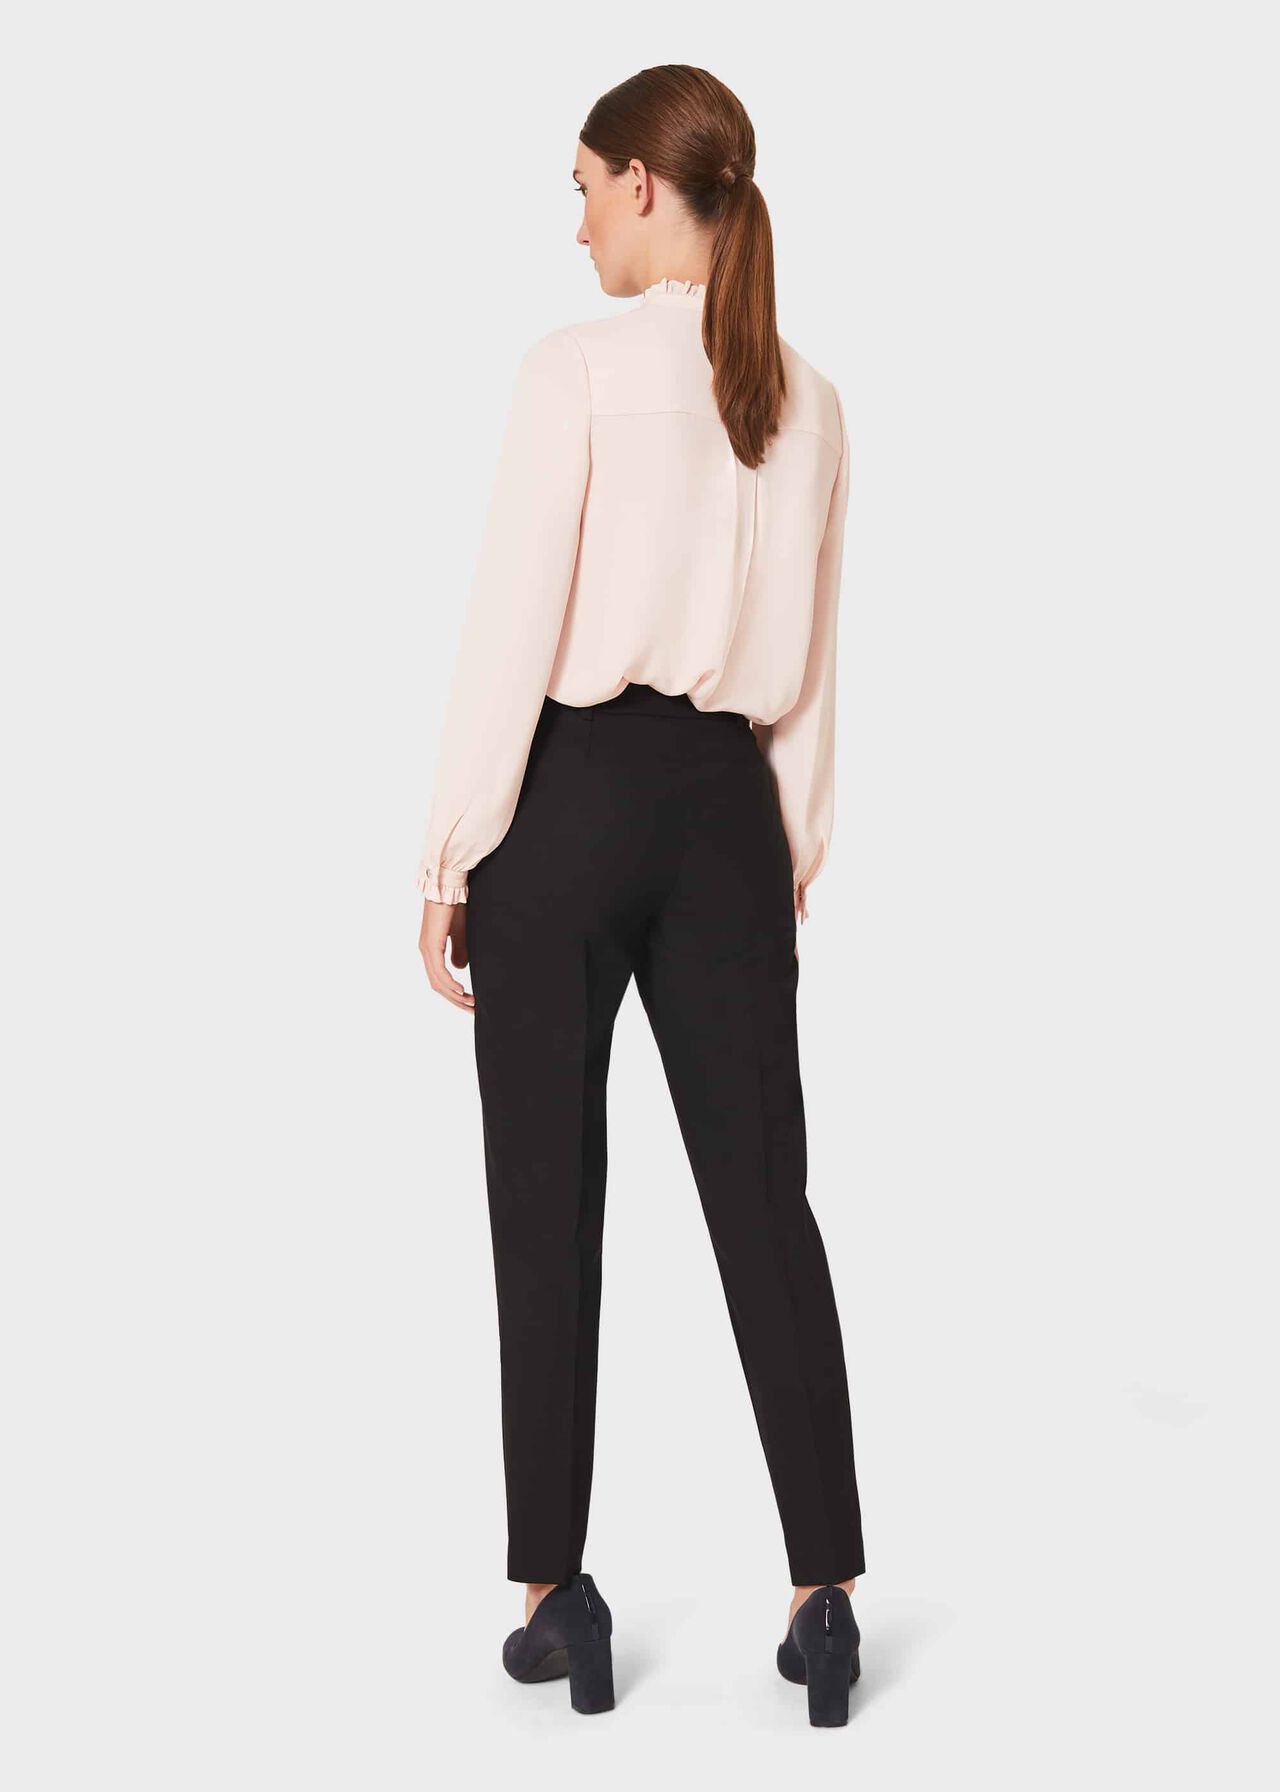 Petite Laurel Wool Blend Tapered trousers With Stretch, Black, hi-res